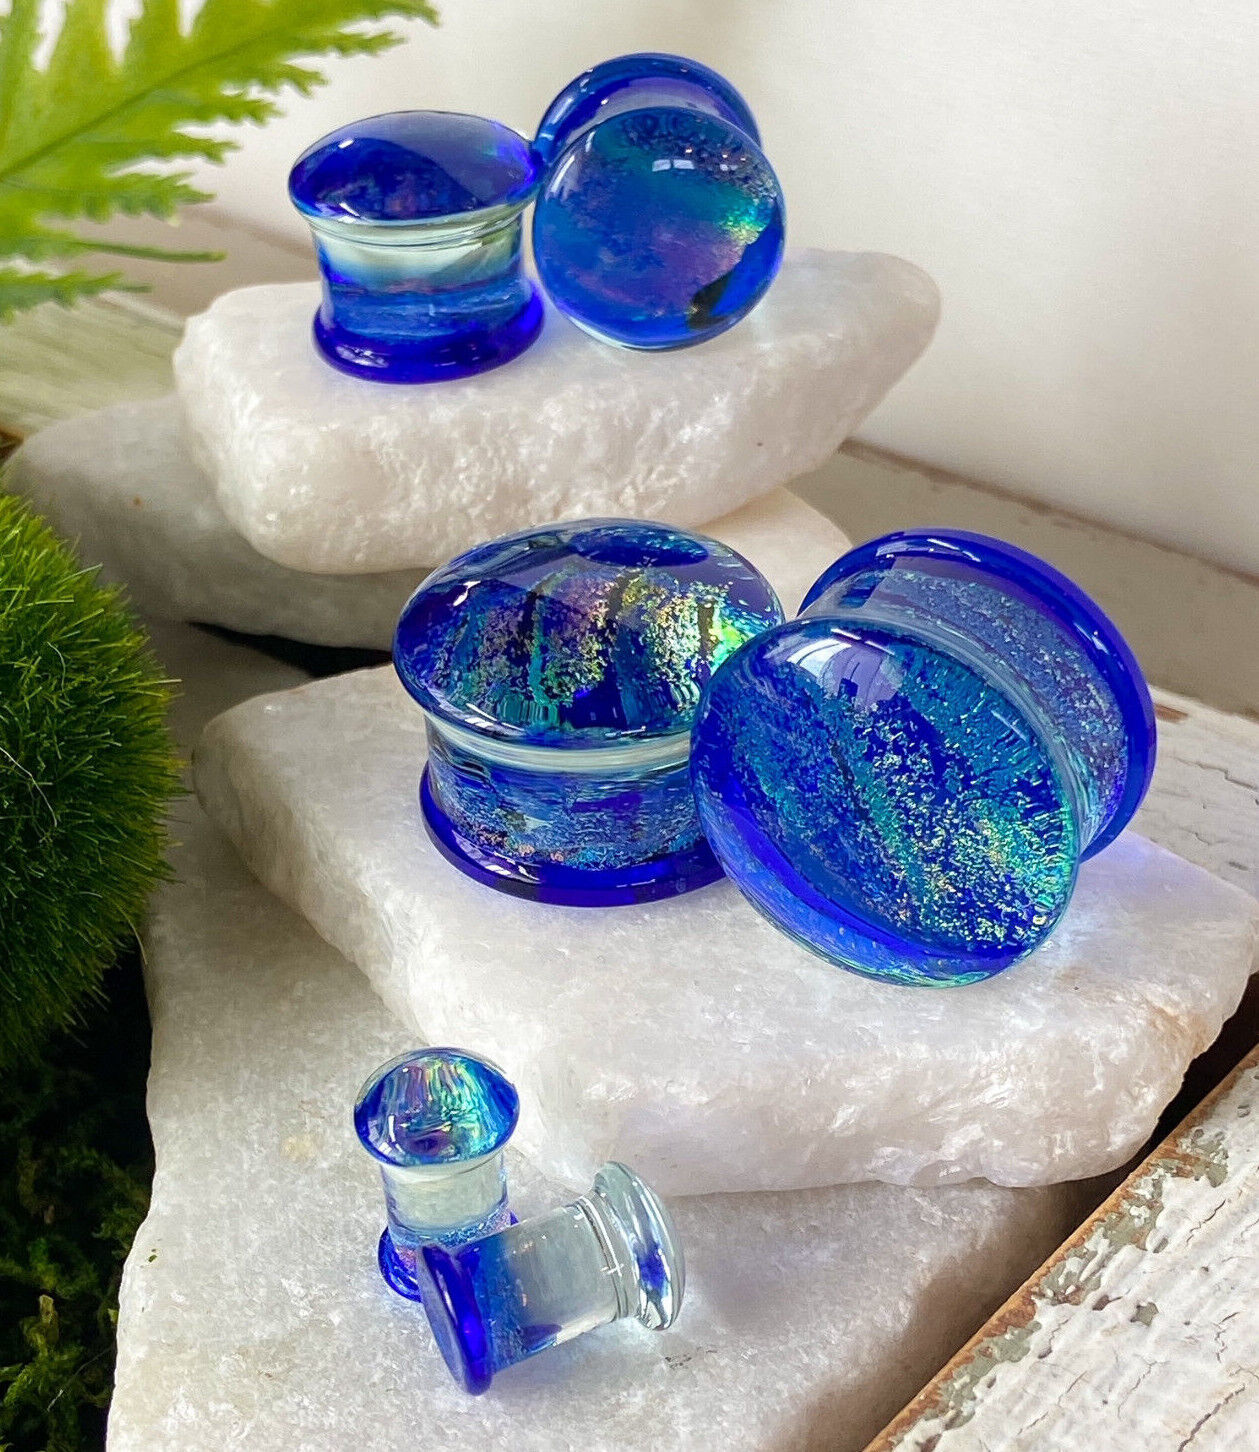 PAIR Blue & Purple Crackle Glass Plugs Double Flare Gauges Tunnels Body Jewelry